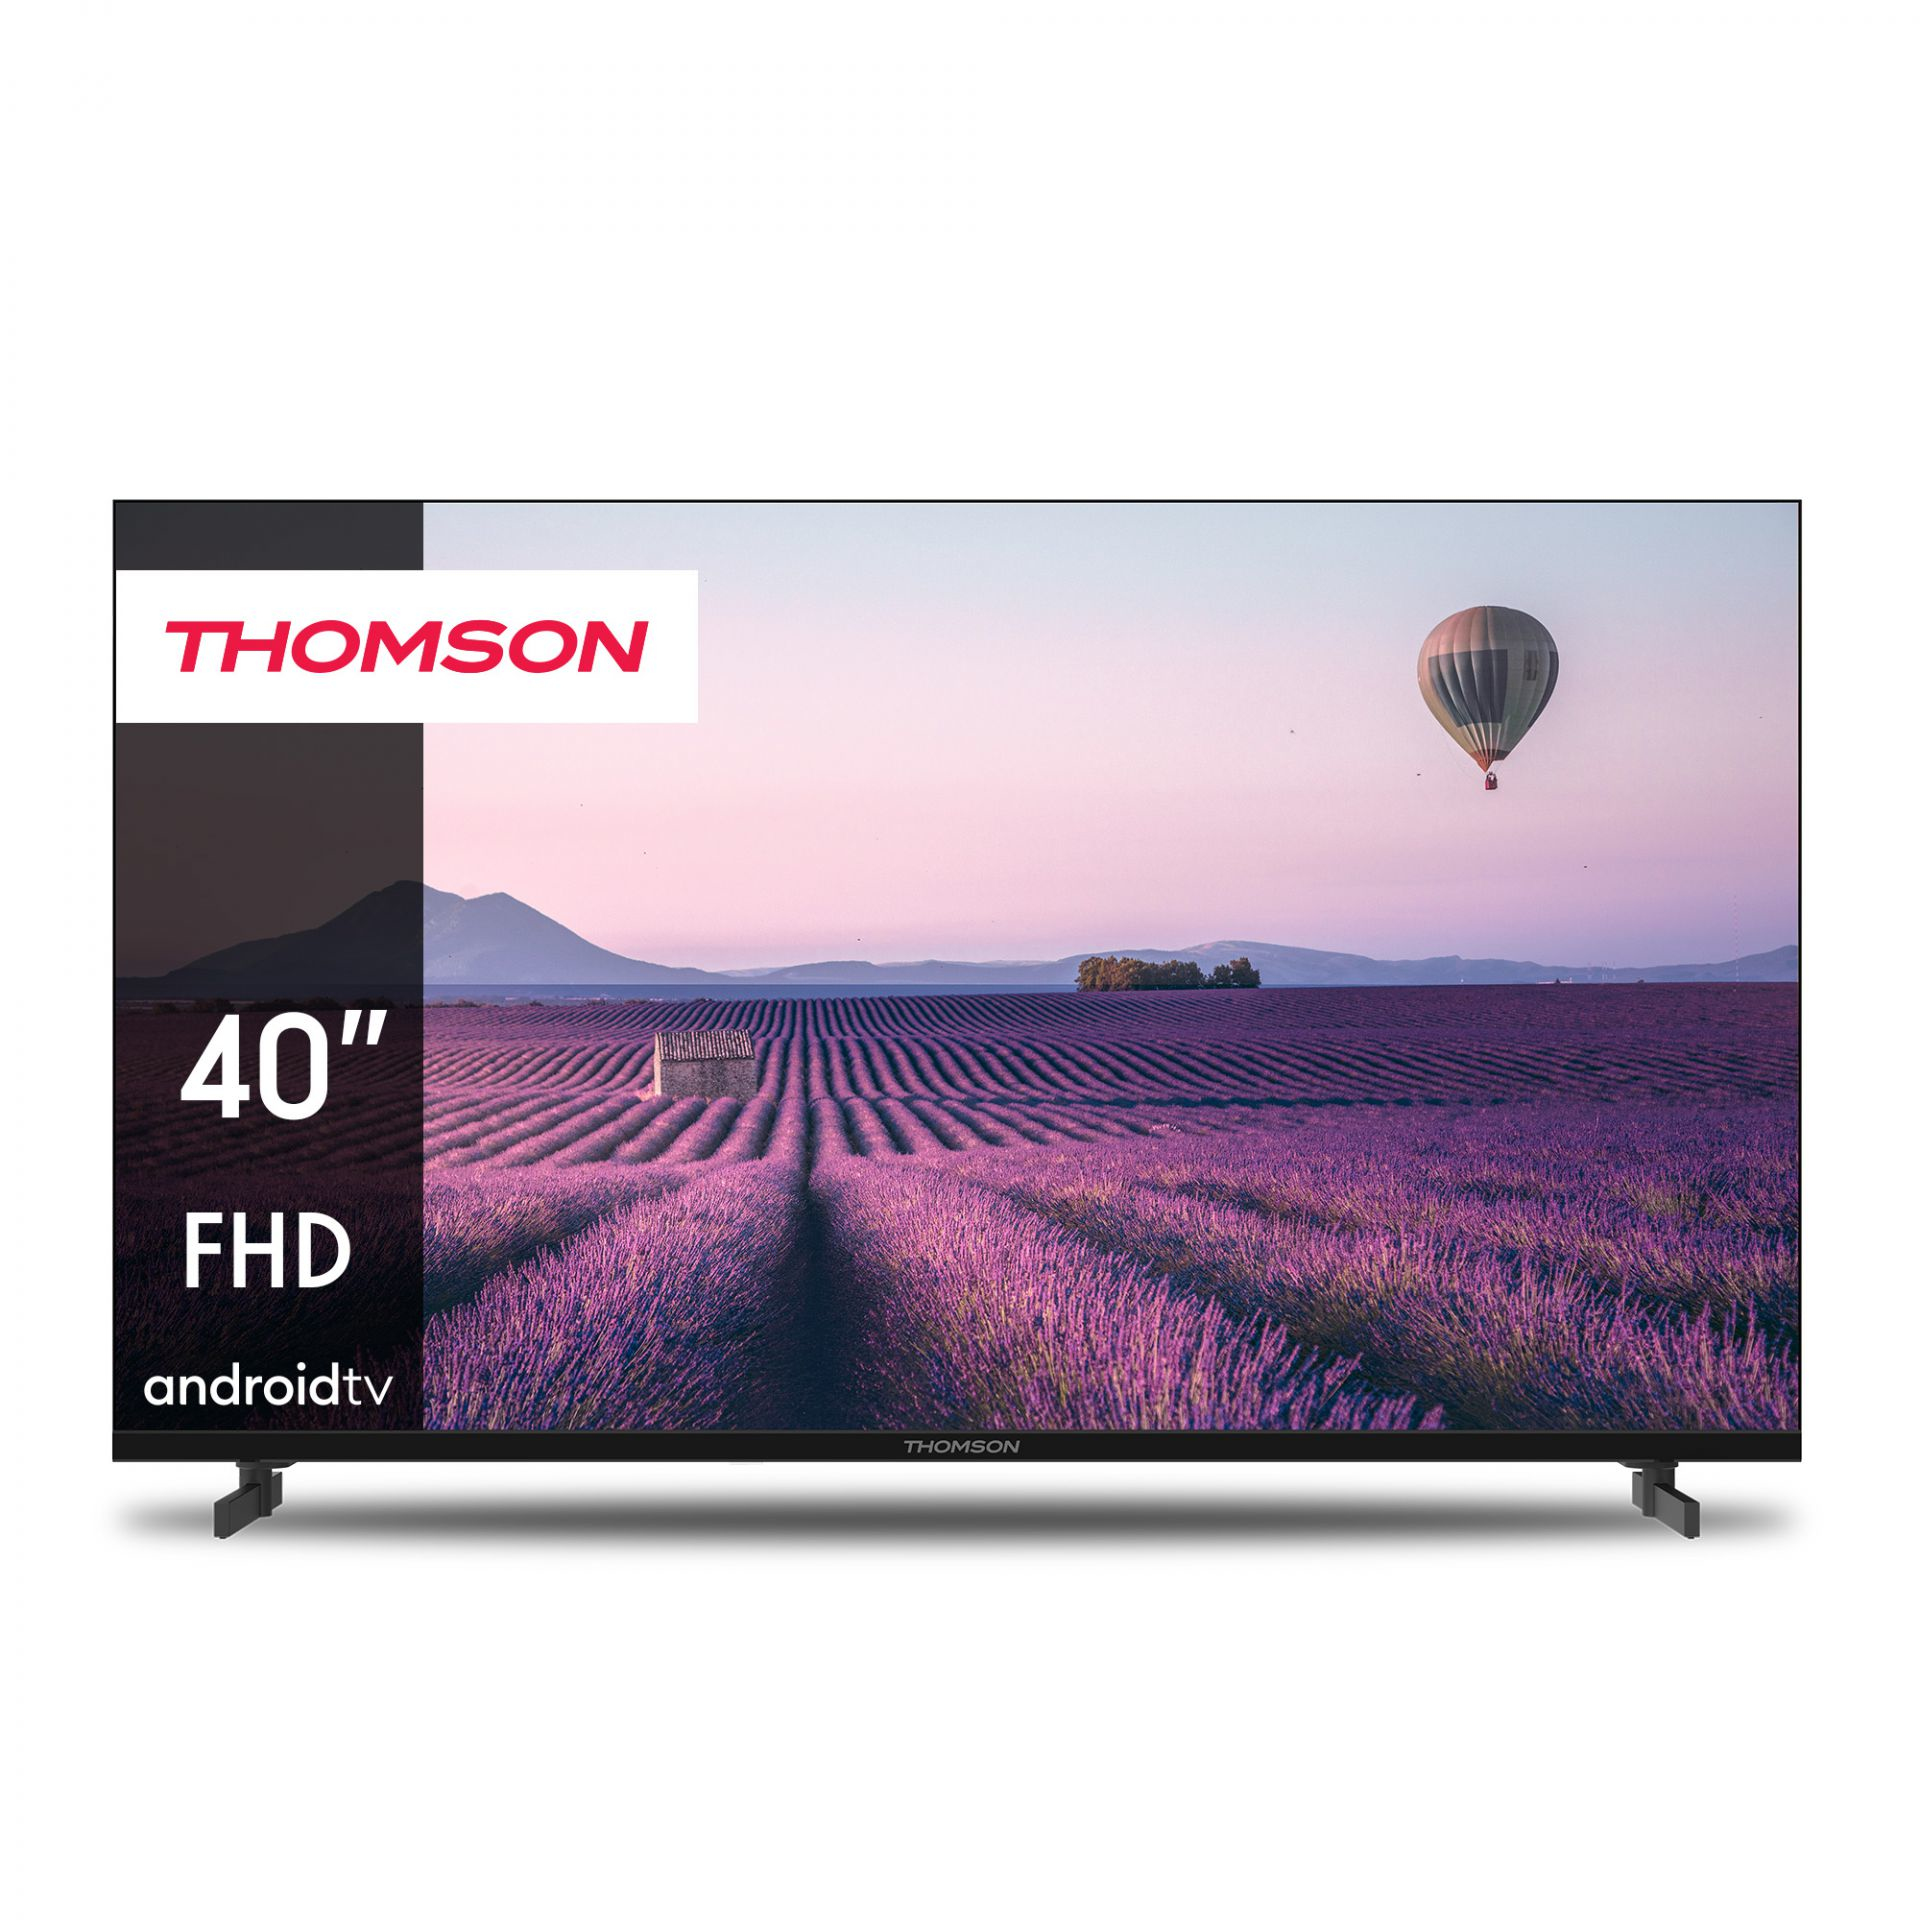 TV 40 THOMSON FHD FRAMELESS SMART T2/C2S2 ANDROID 11